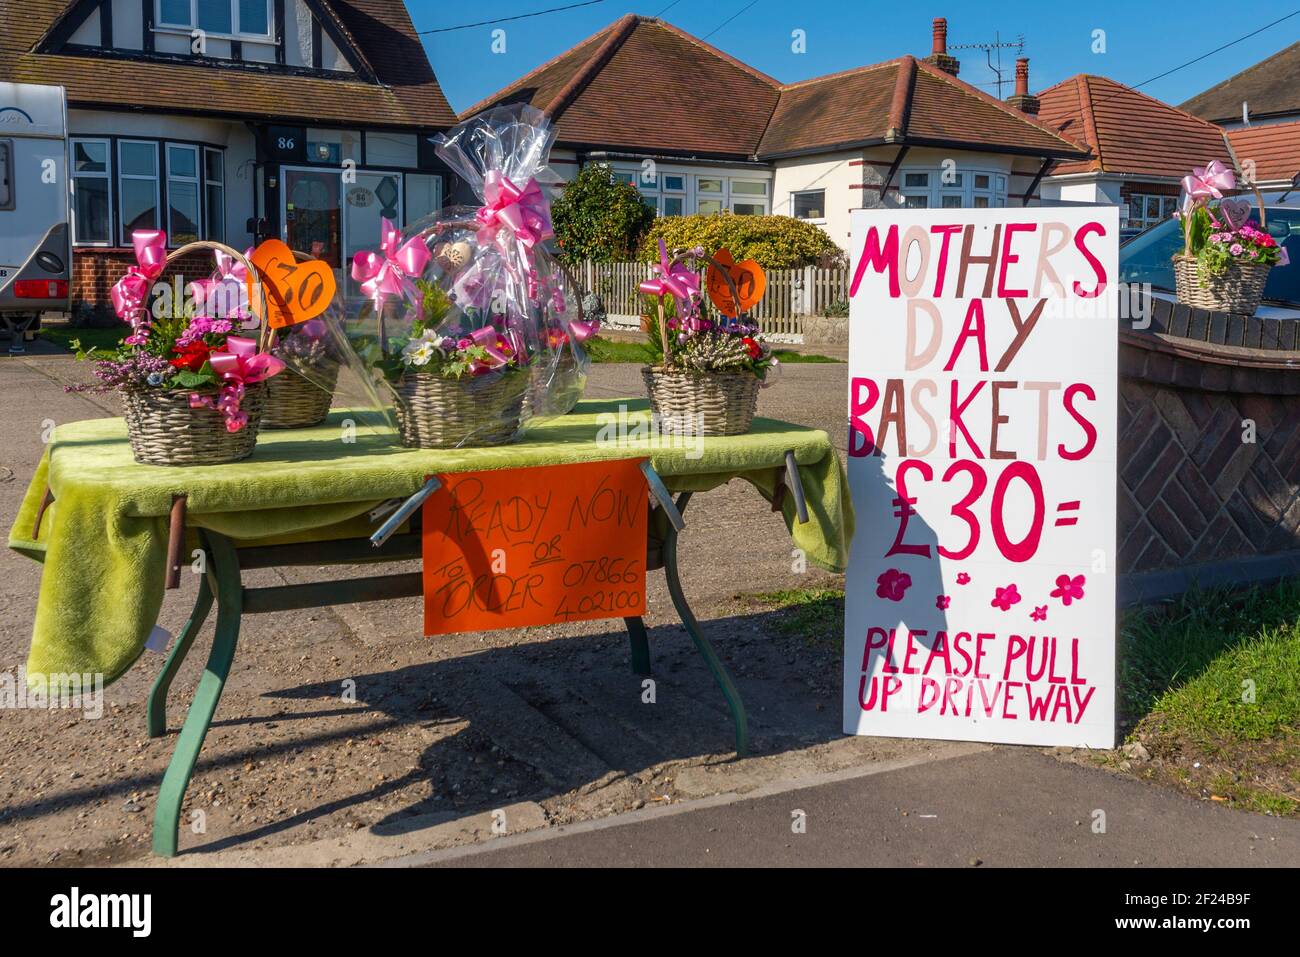 Home yard stall selling Mothers Day flower baskets in Southend on Sea, Essex, UK. Mothering Sunday gifts. Homemade Stock Photo